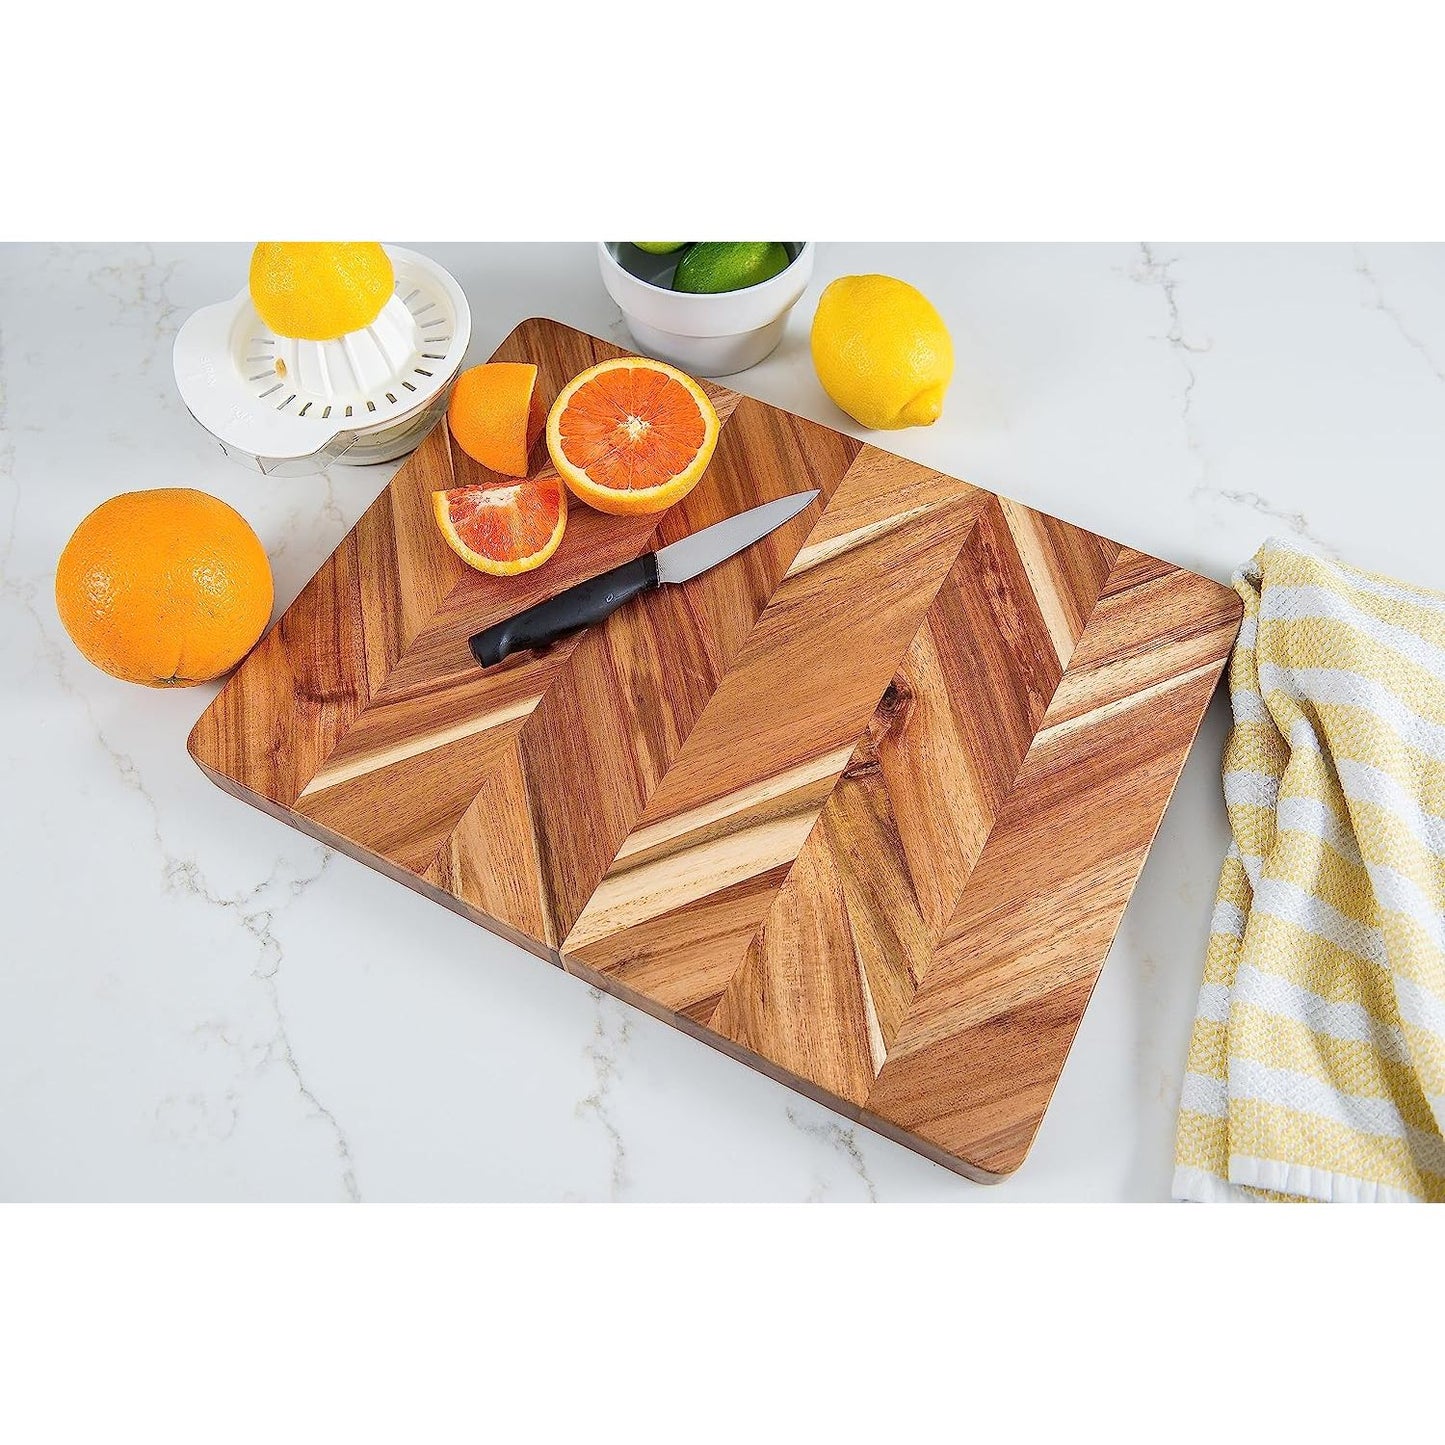 Acacia Rectangular Cutting/Serve Board With Inset Handles And Well, Medium